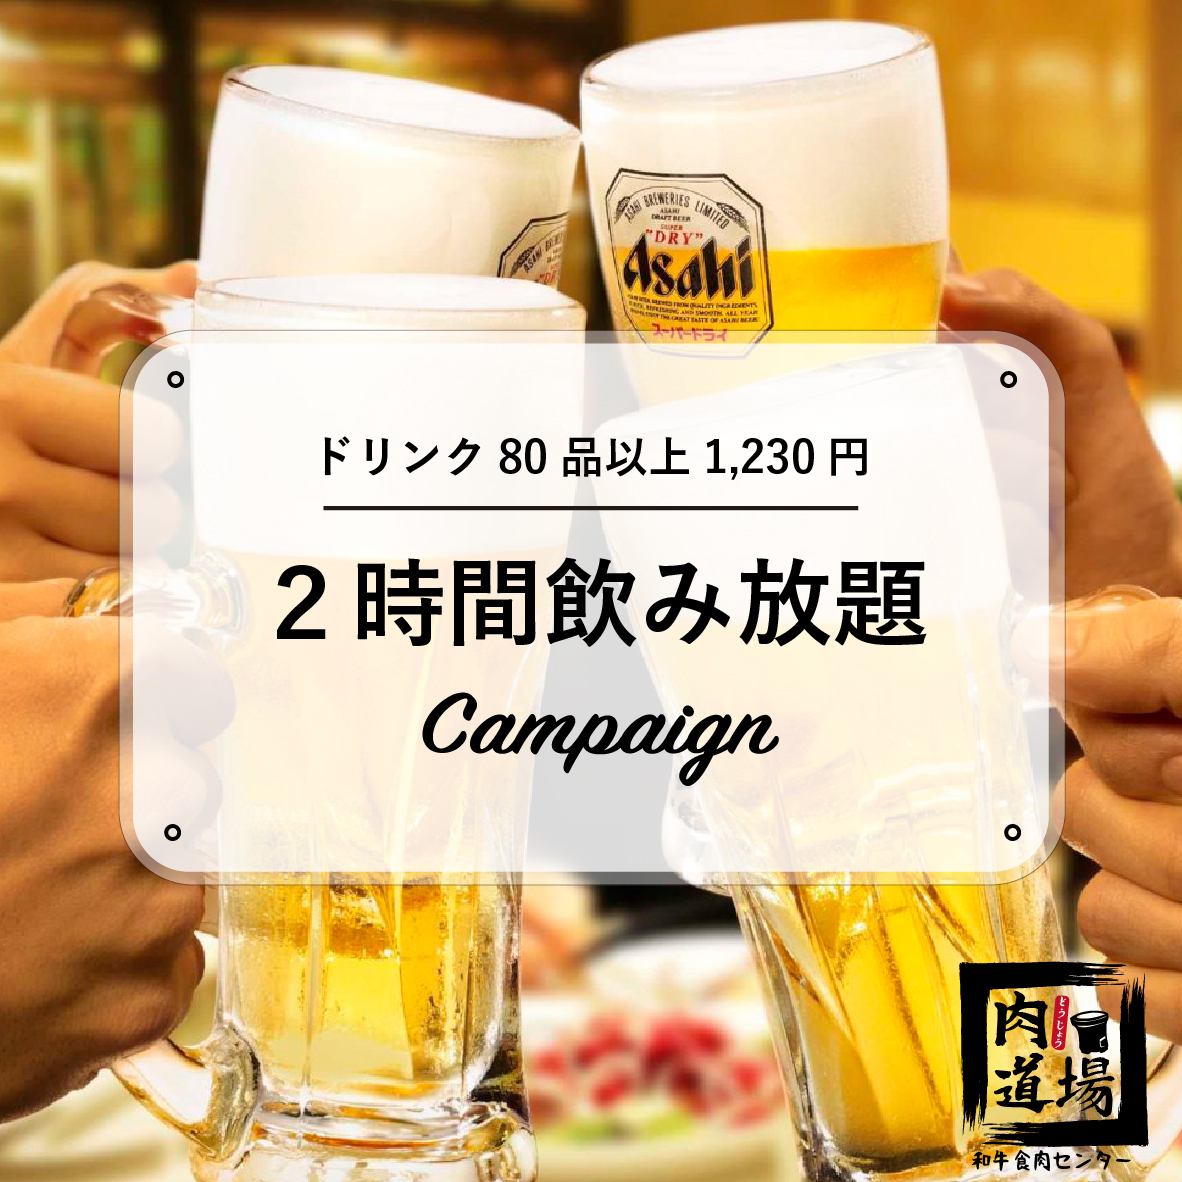 2H all-you-can-drink 1230 yen ★ Over 80 abundant drinks